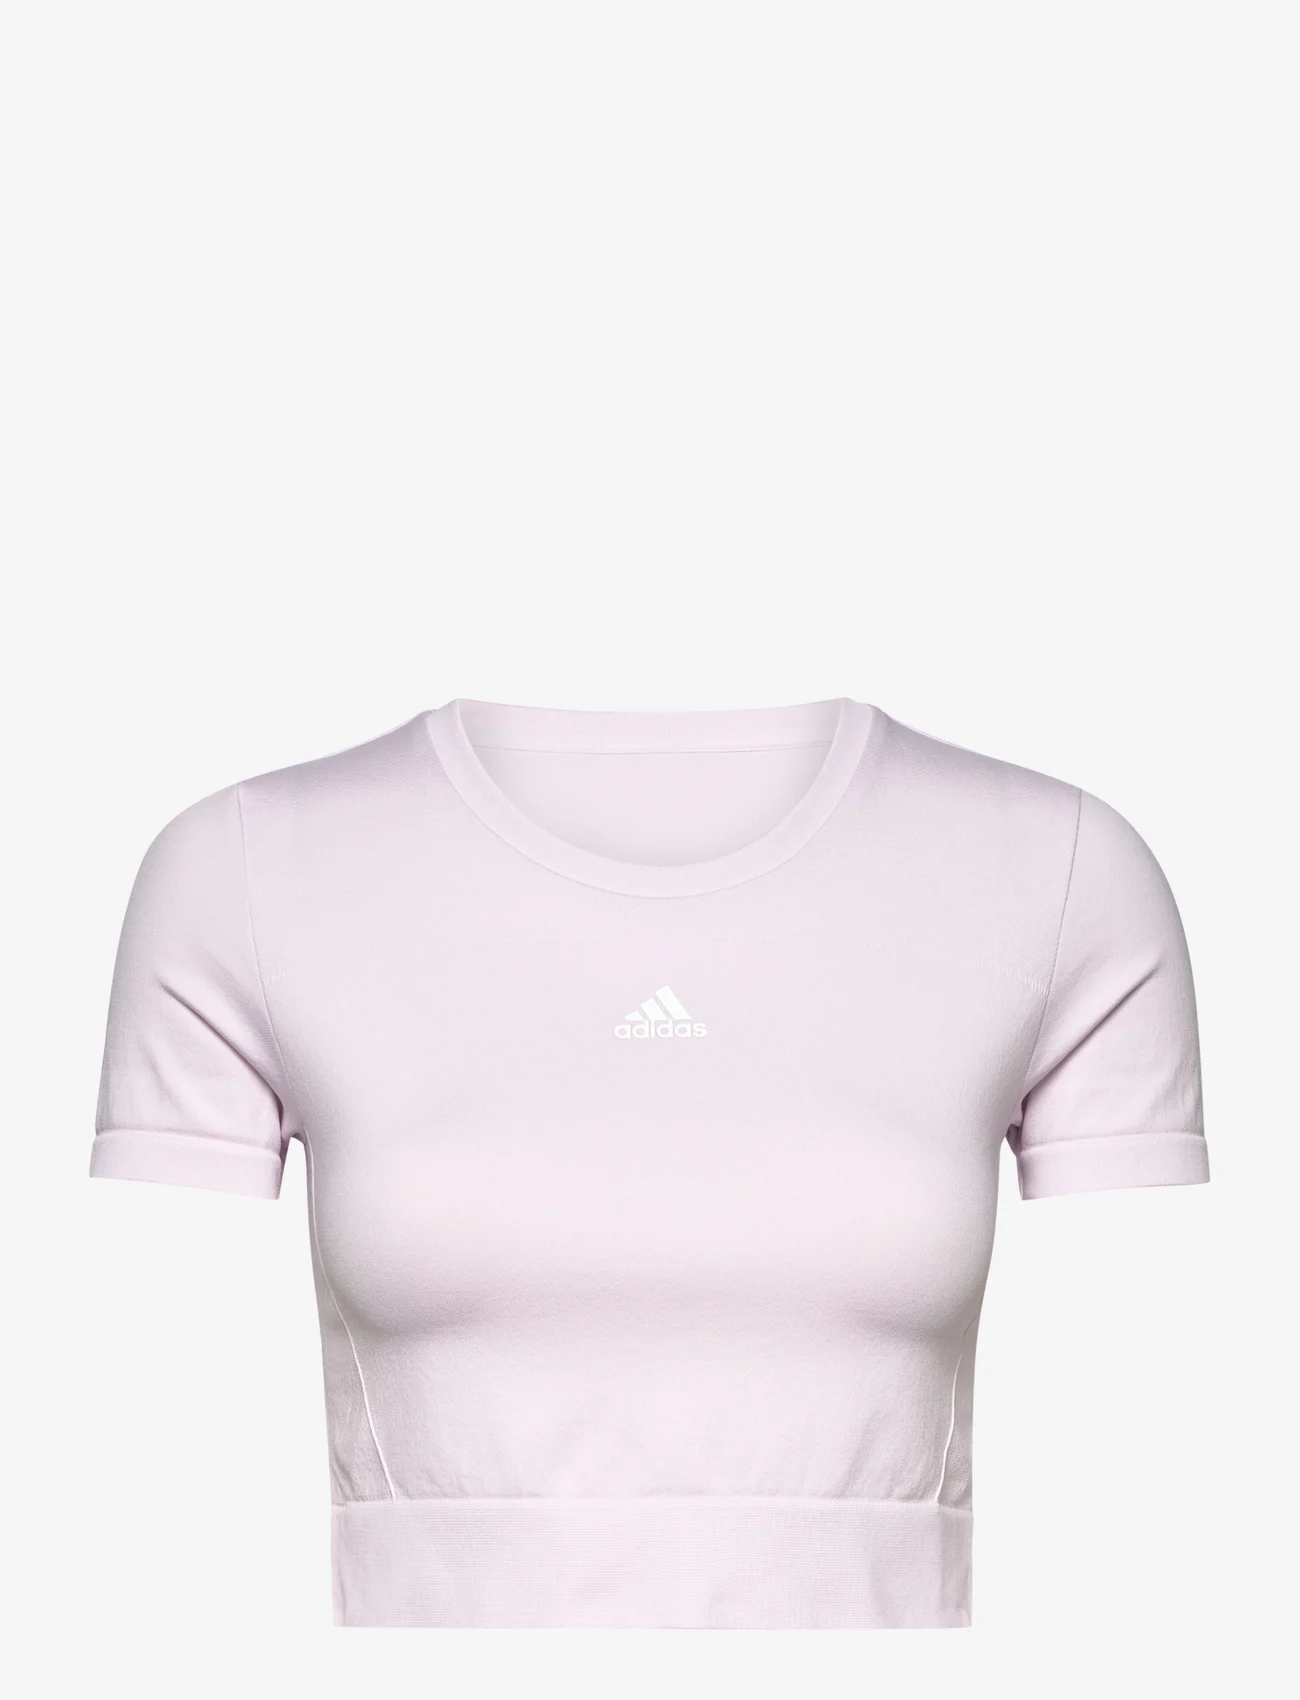 adidas Performance - AEROKNIT Seamless Fitted Cropped Tee W - crop tops - almpnk/white - 0